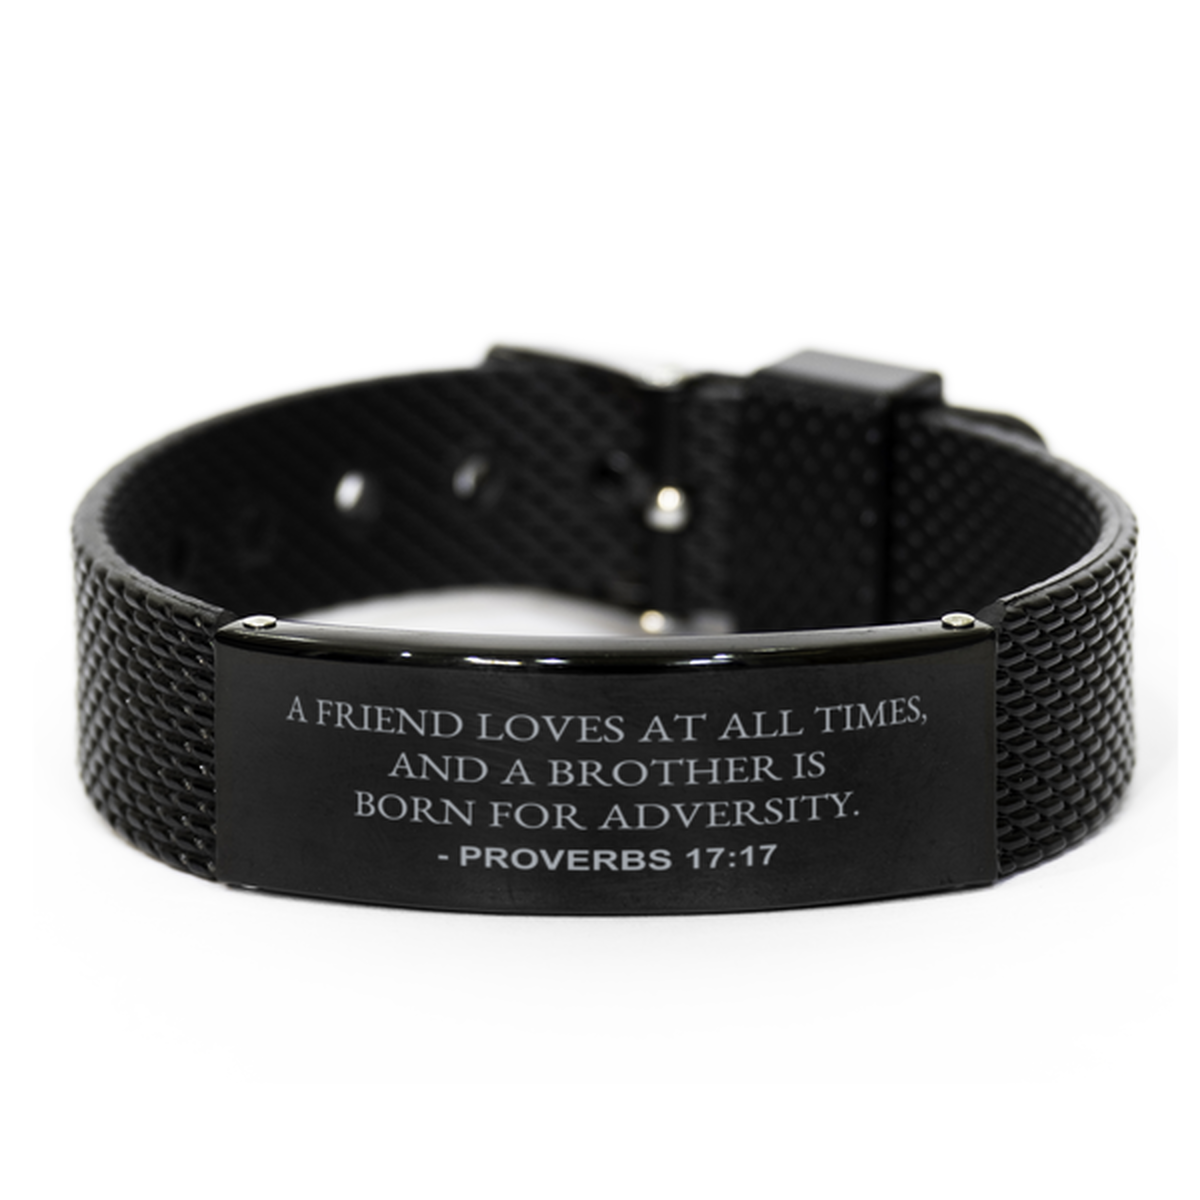 Christian Black Bracelet,, Proverbs 17:17 A Friend Loves At All Times, And A Brother Is, Motivational Bible Verse Gifts For Men Women